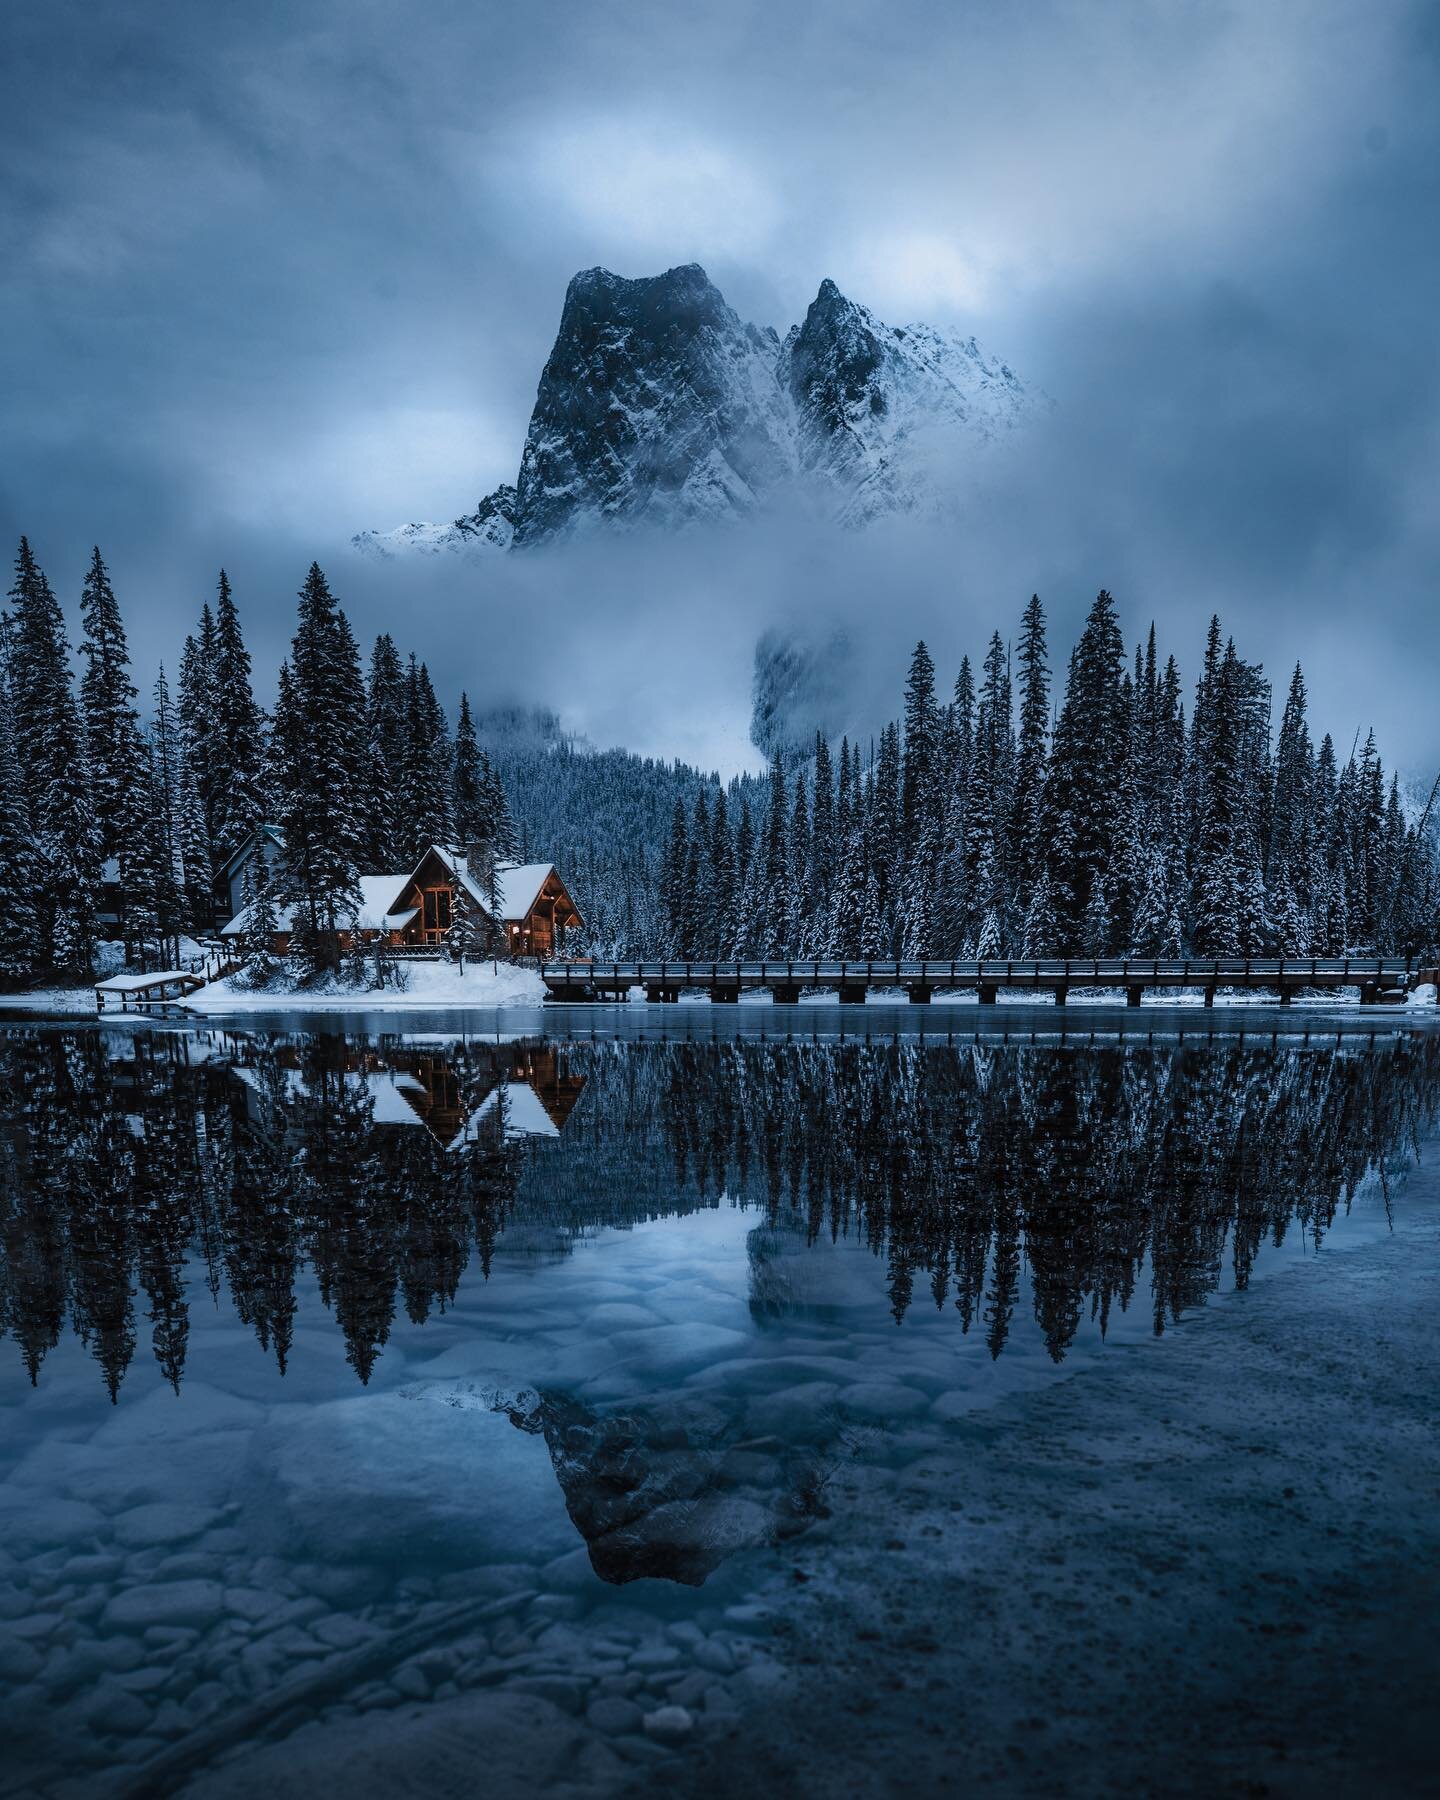 Emerald lake is one of the last lakes to freeze in the Rockies. This is when you know winter is here! Are you feeling winter yet?